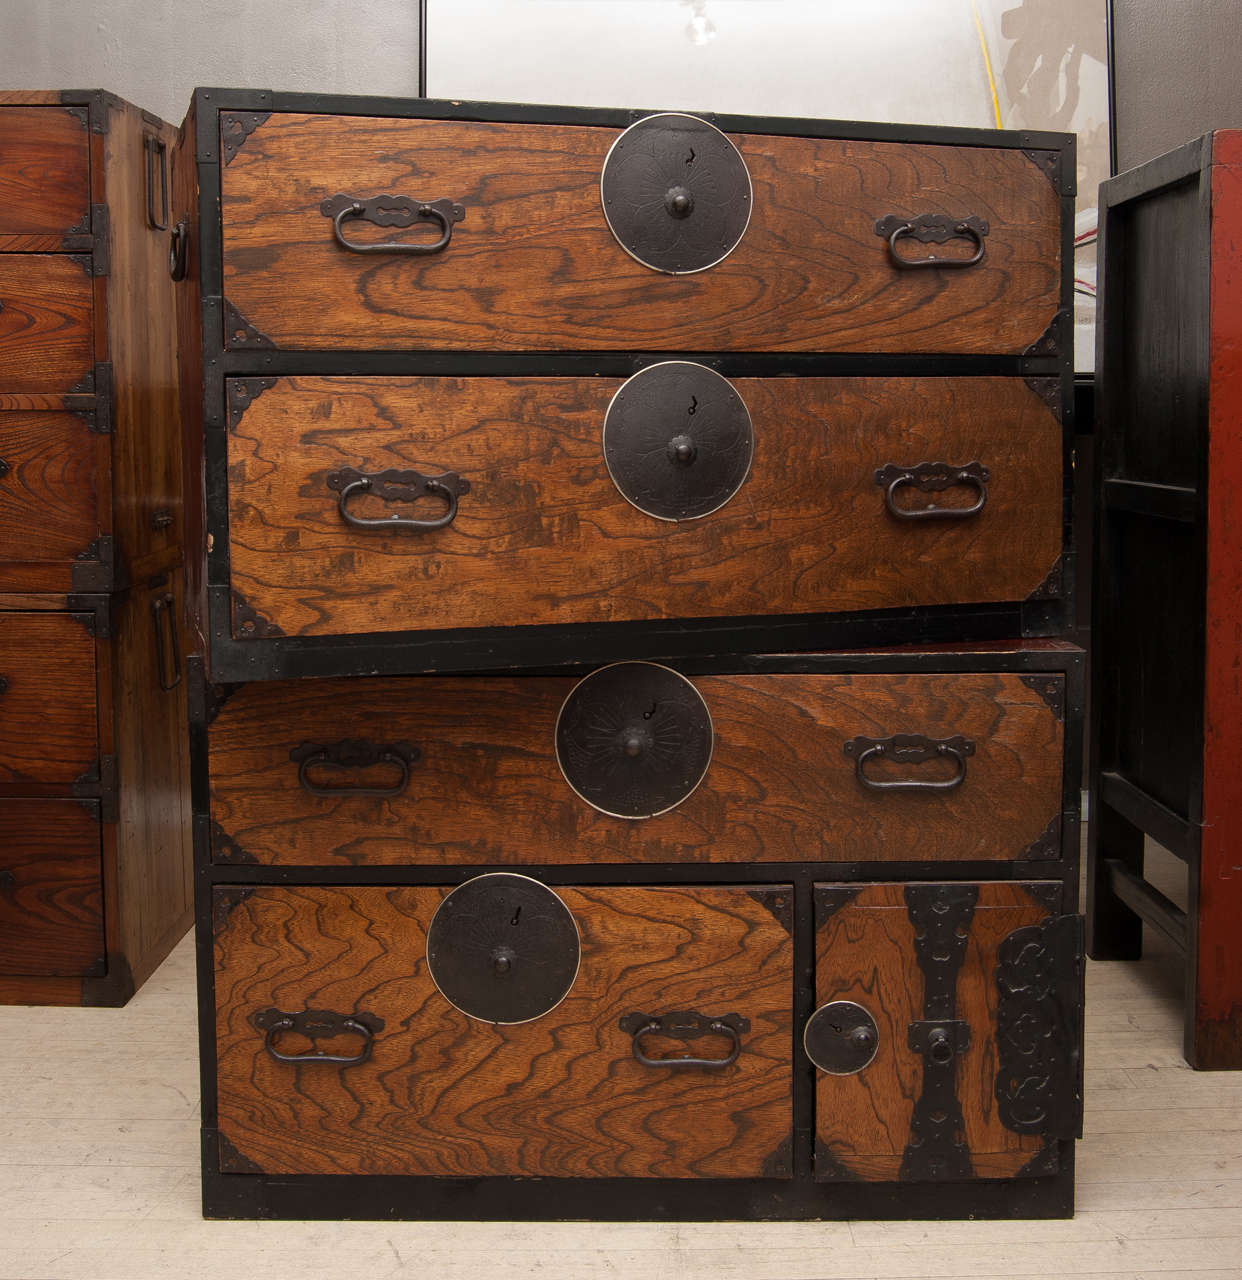 Two section, strikingly grained chesnut wood tansu with hand forged iron and bronze harware in the traditional